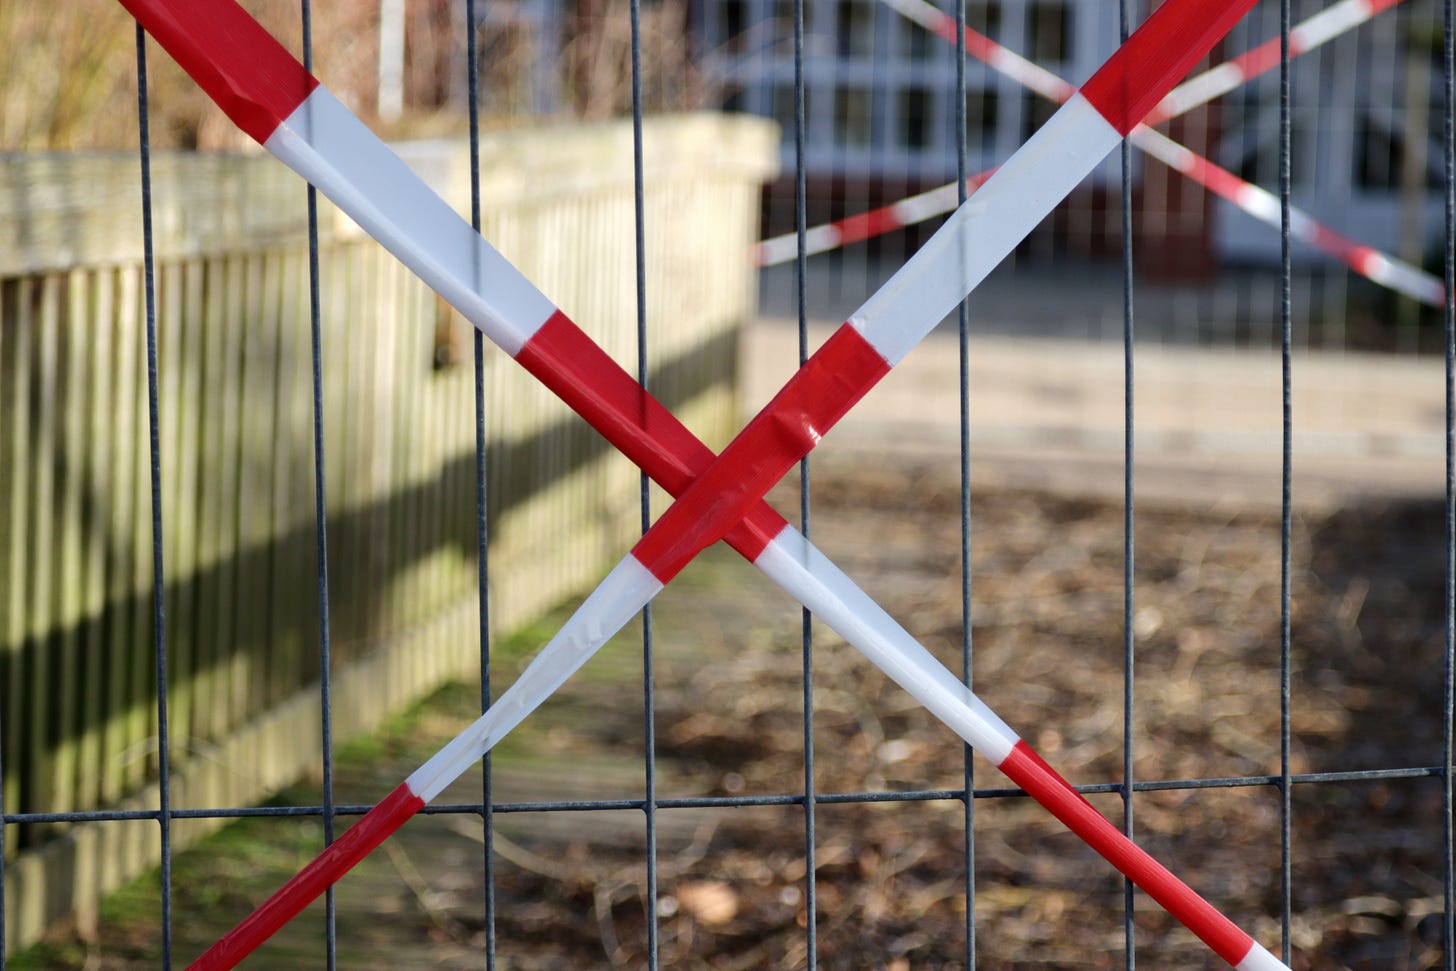 Red and white tape in front of a fence